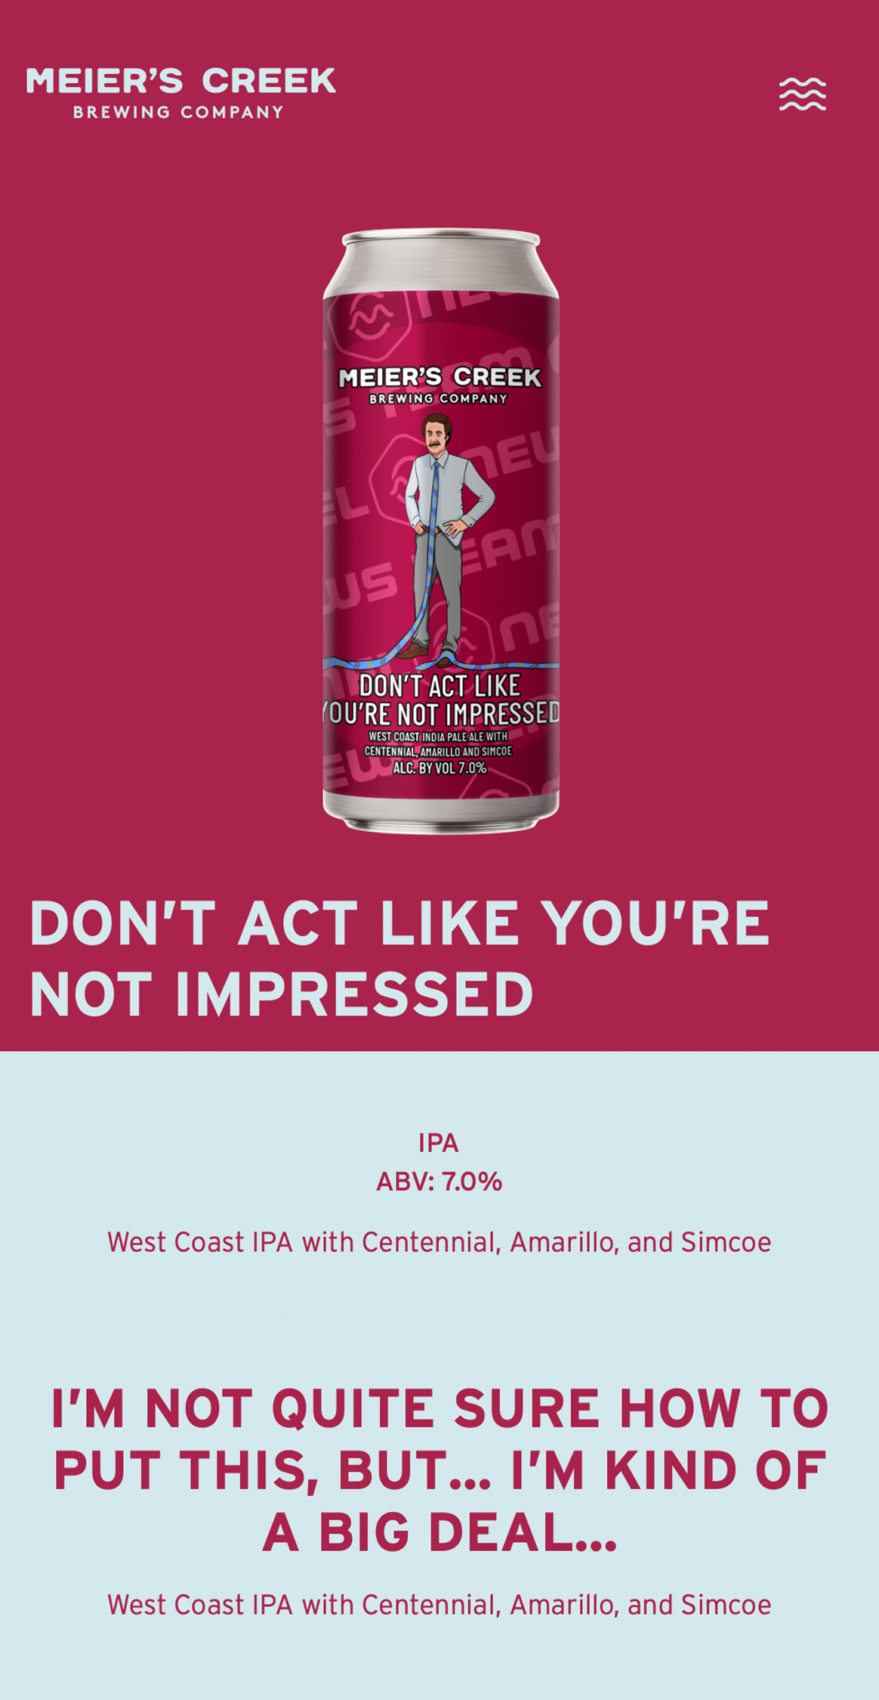 The Meier's Creek Brewing Company's Dont' Act Like You're Not Impressed beer page